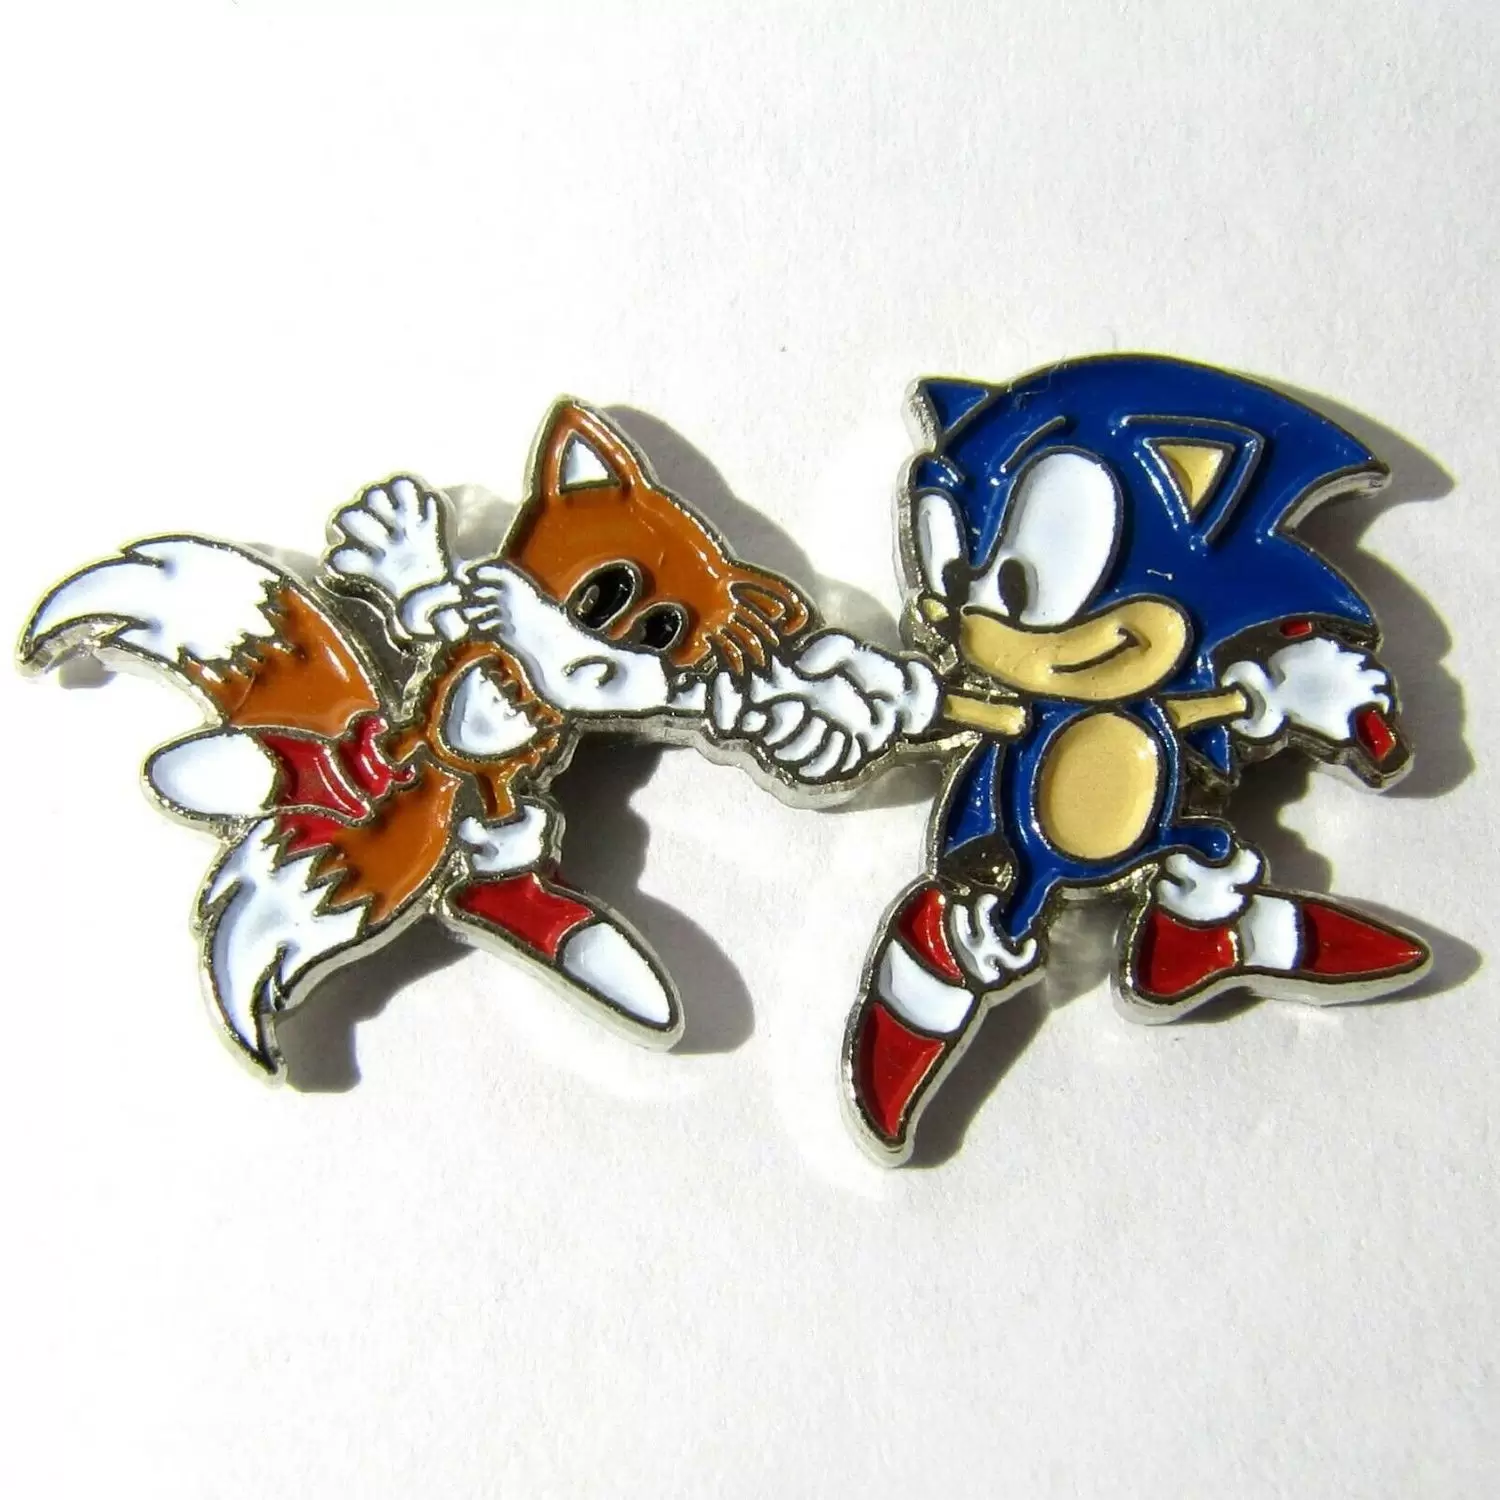 Sonic the Hedgehog Pins - Sonic & Tails